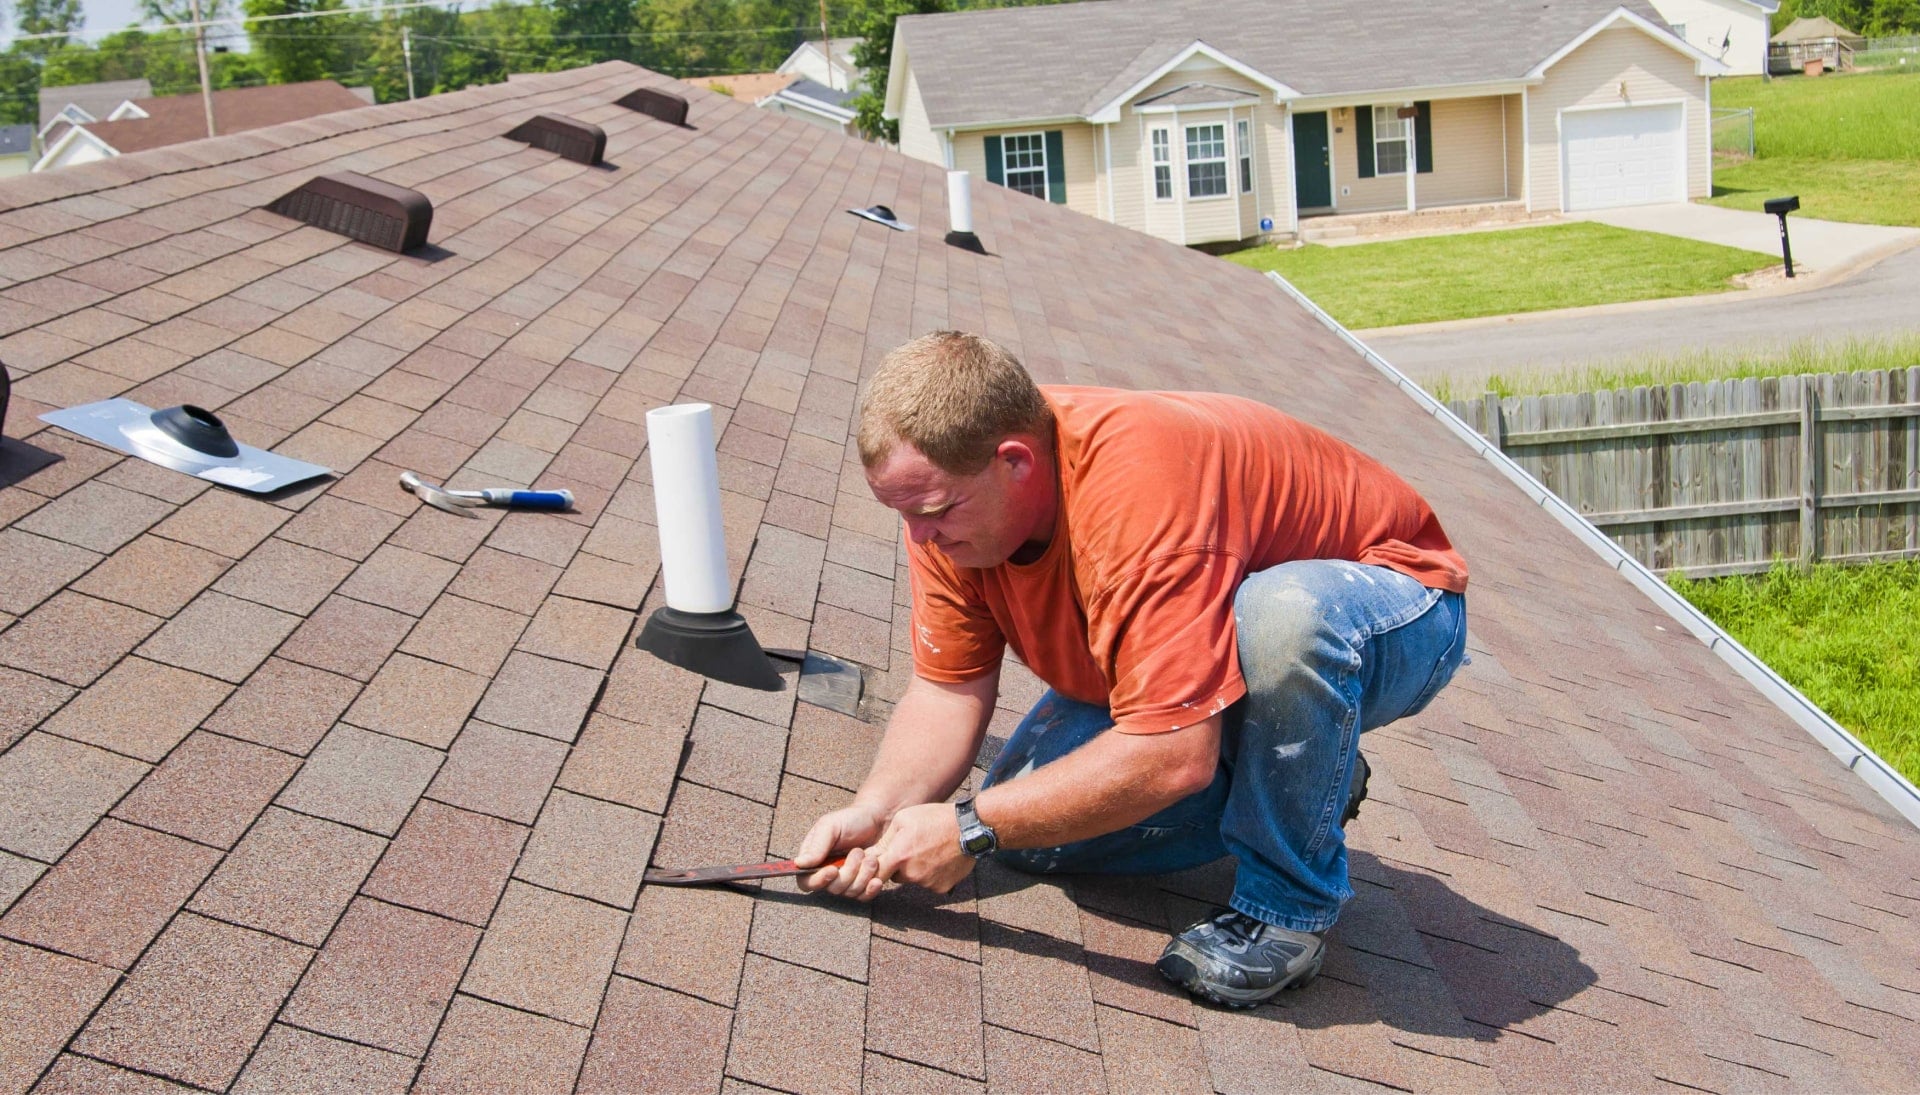 Quality roof and shingle repair services that meet your needs and exceed your expectations in Lafayette, LA